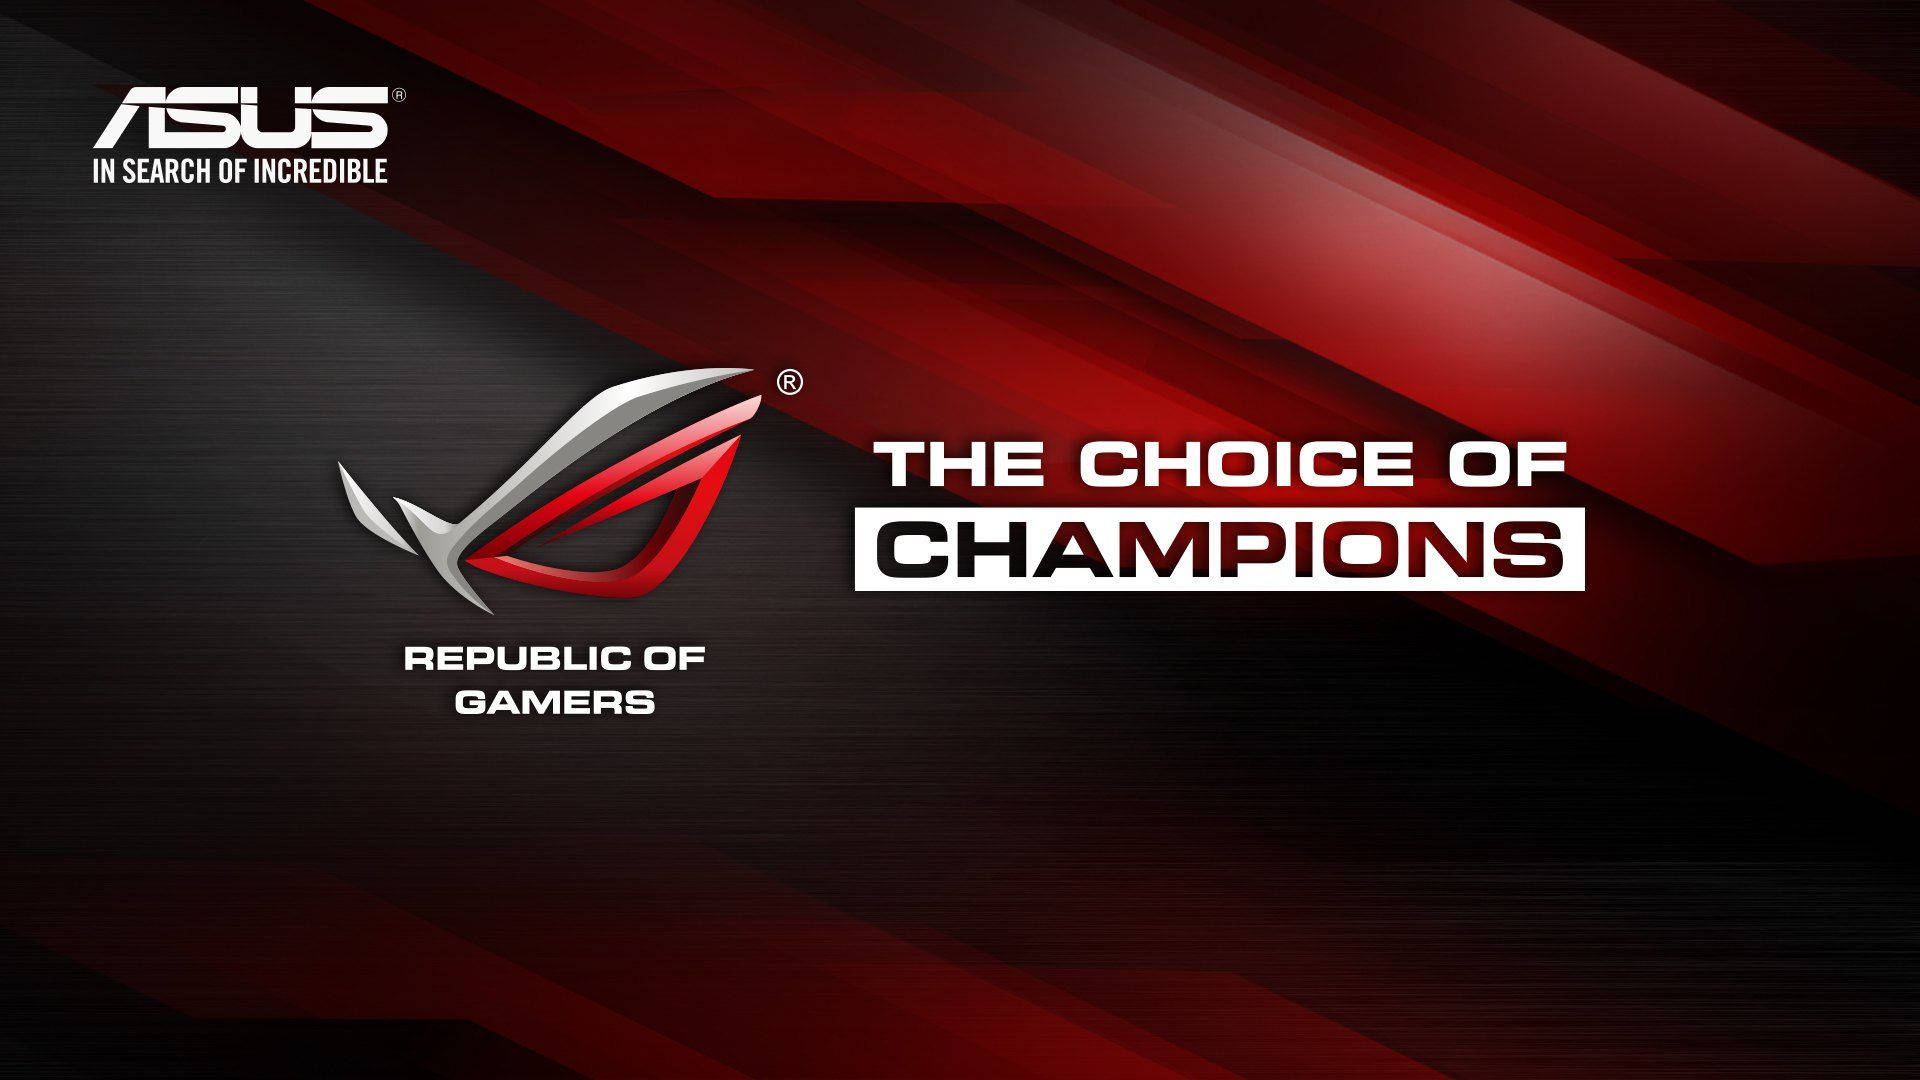 High Performance ROG Gaming Computer by Asus Wallpaper